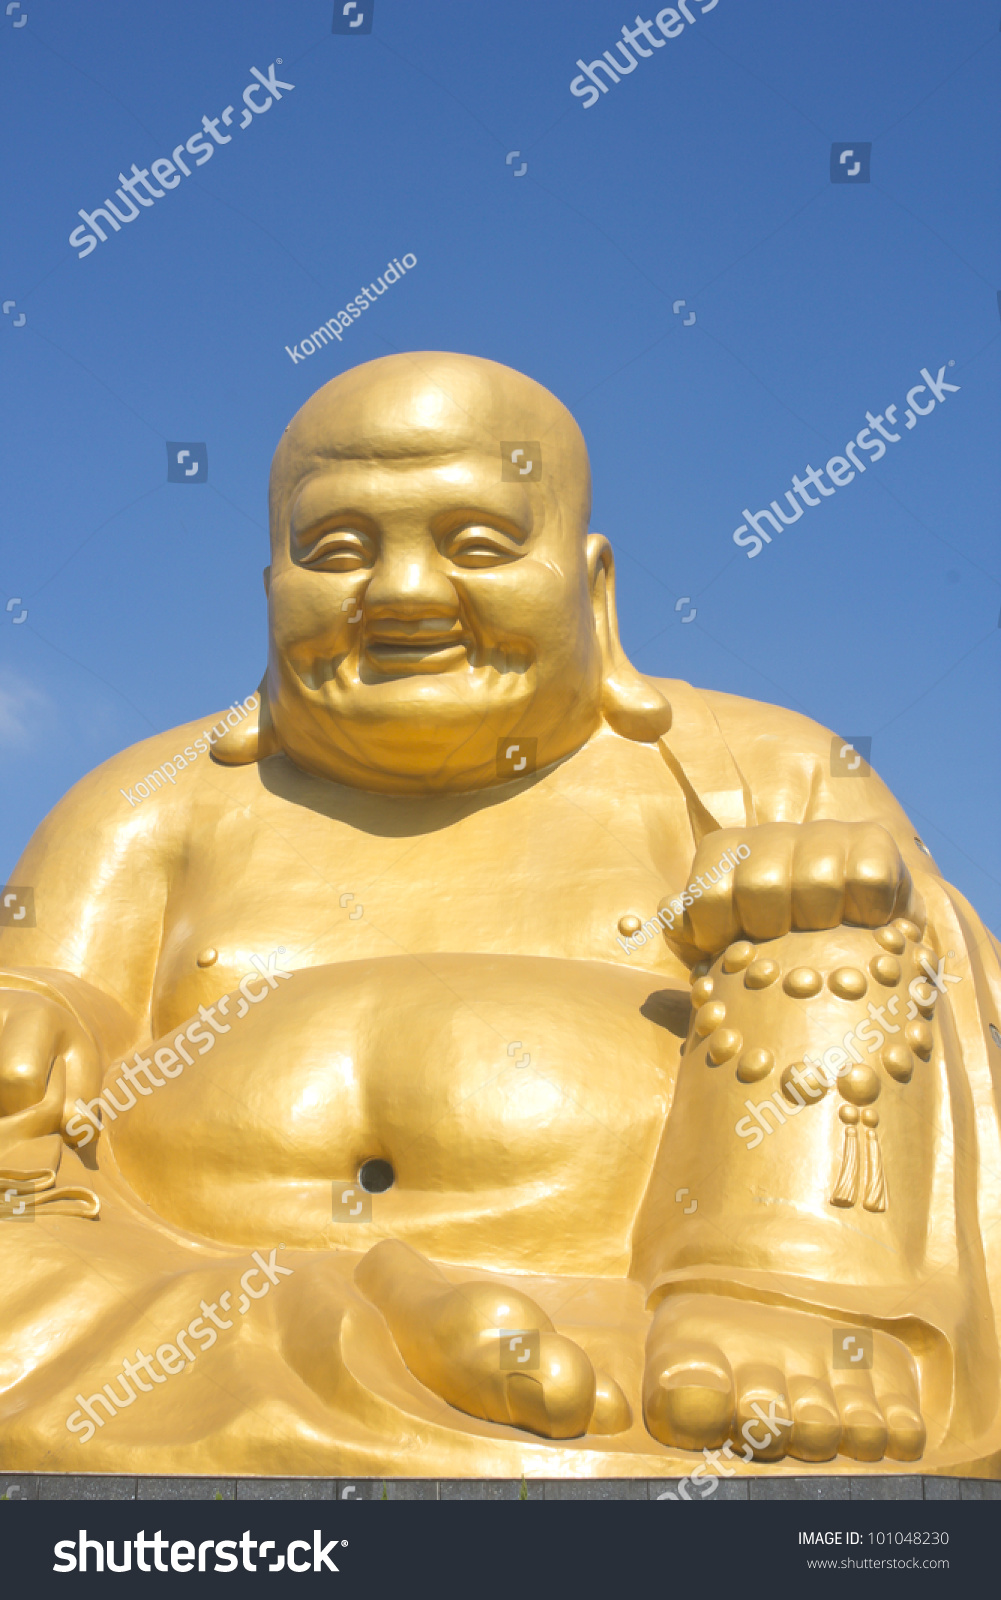 Golden Statue Of The Laughing Buddha In Taichung, Taiwan Stock Photo ...